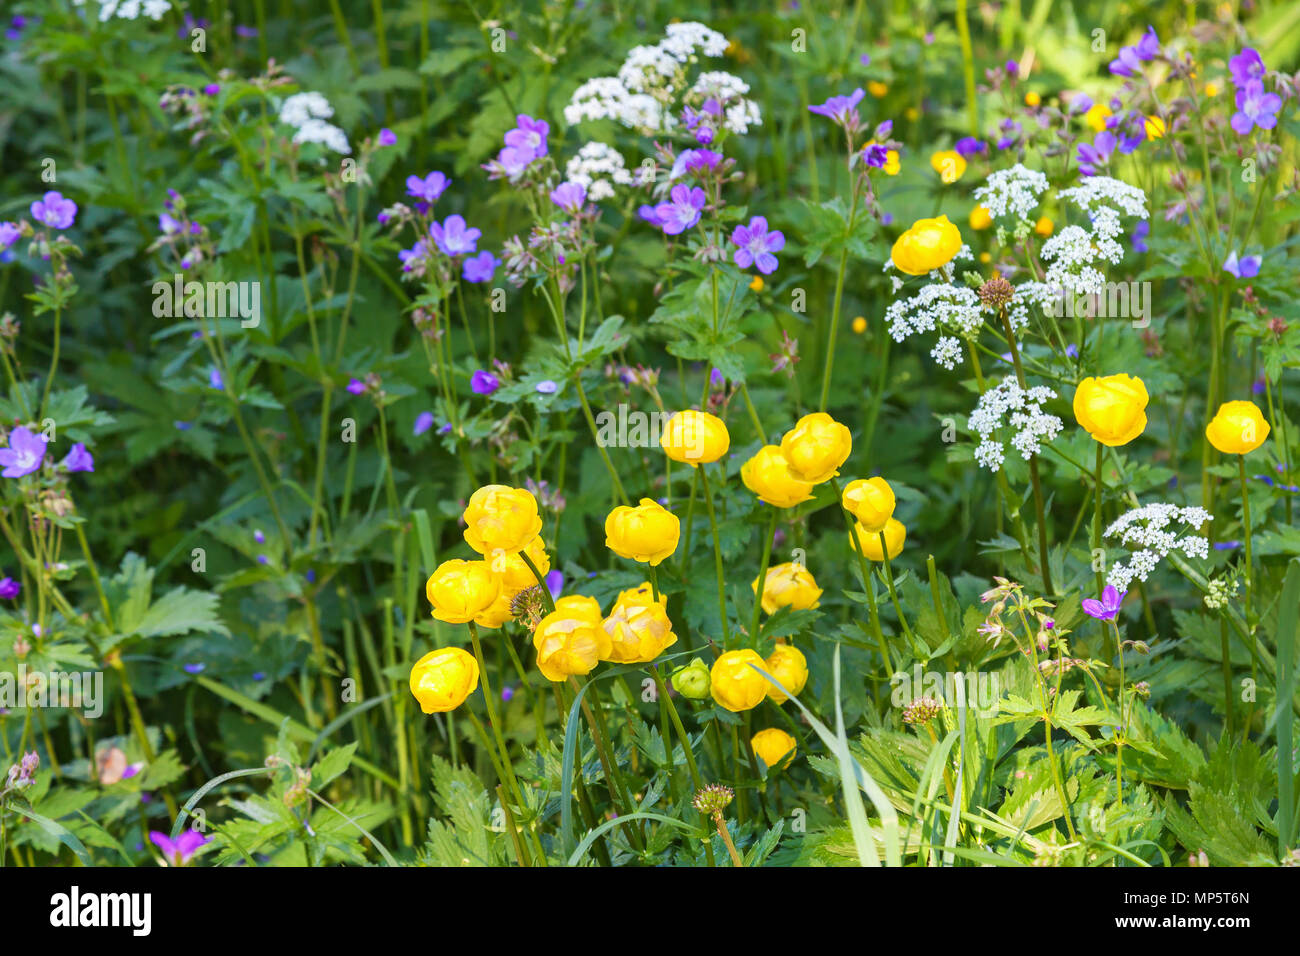 Flowering globe flowers and wood cranesbill on a meadow Stock Photo